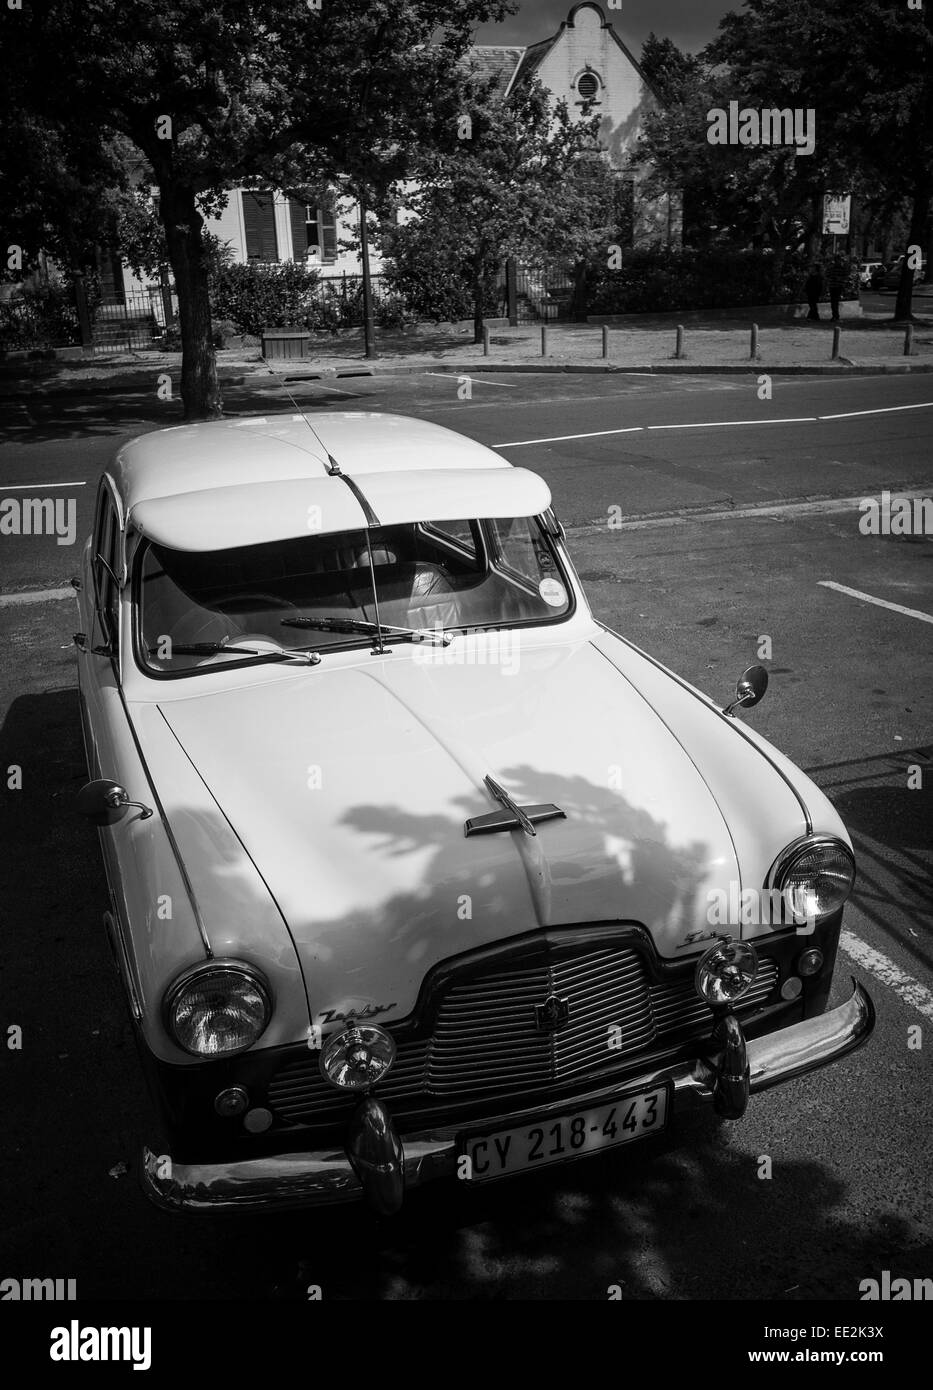 A 1950's Ford Zephyr Six classic car parked in Die Braak, Stellenbosch, South Africa. Used for tourist trips around the town. Stock Photo